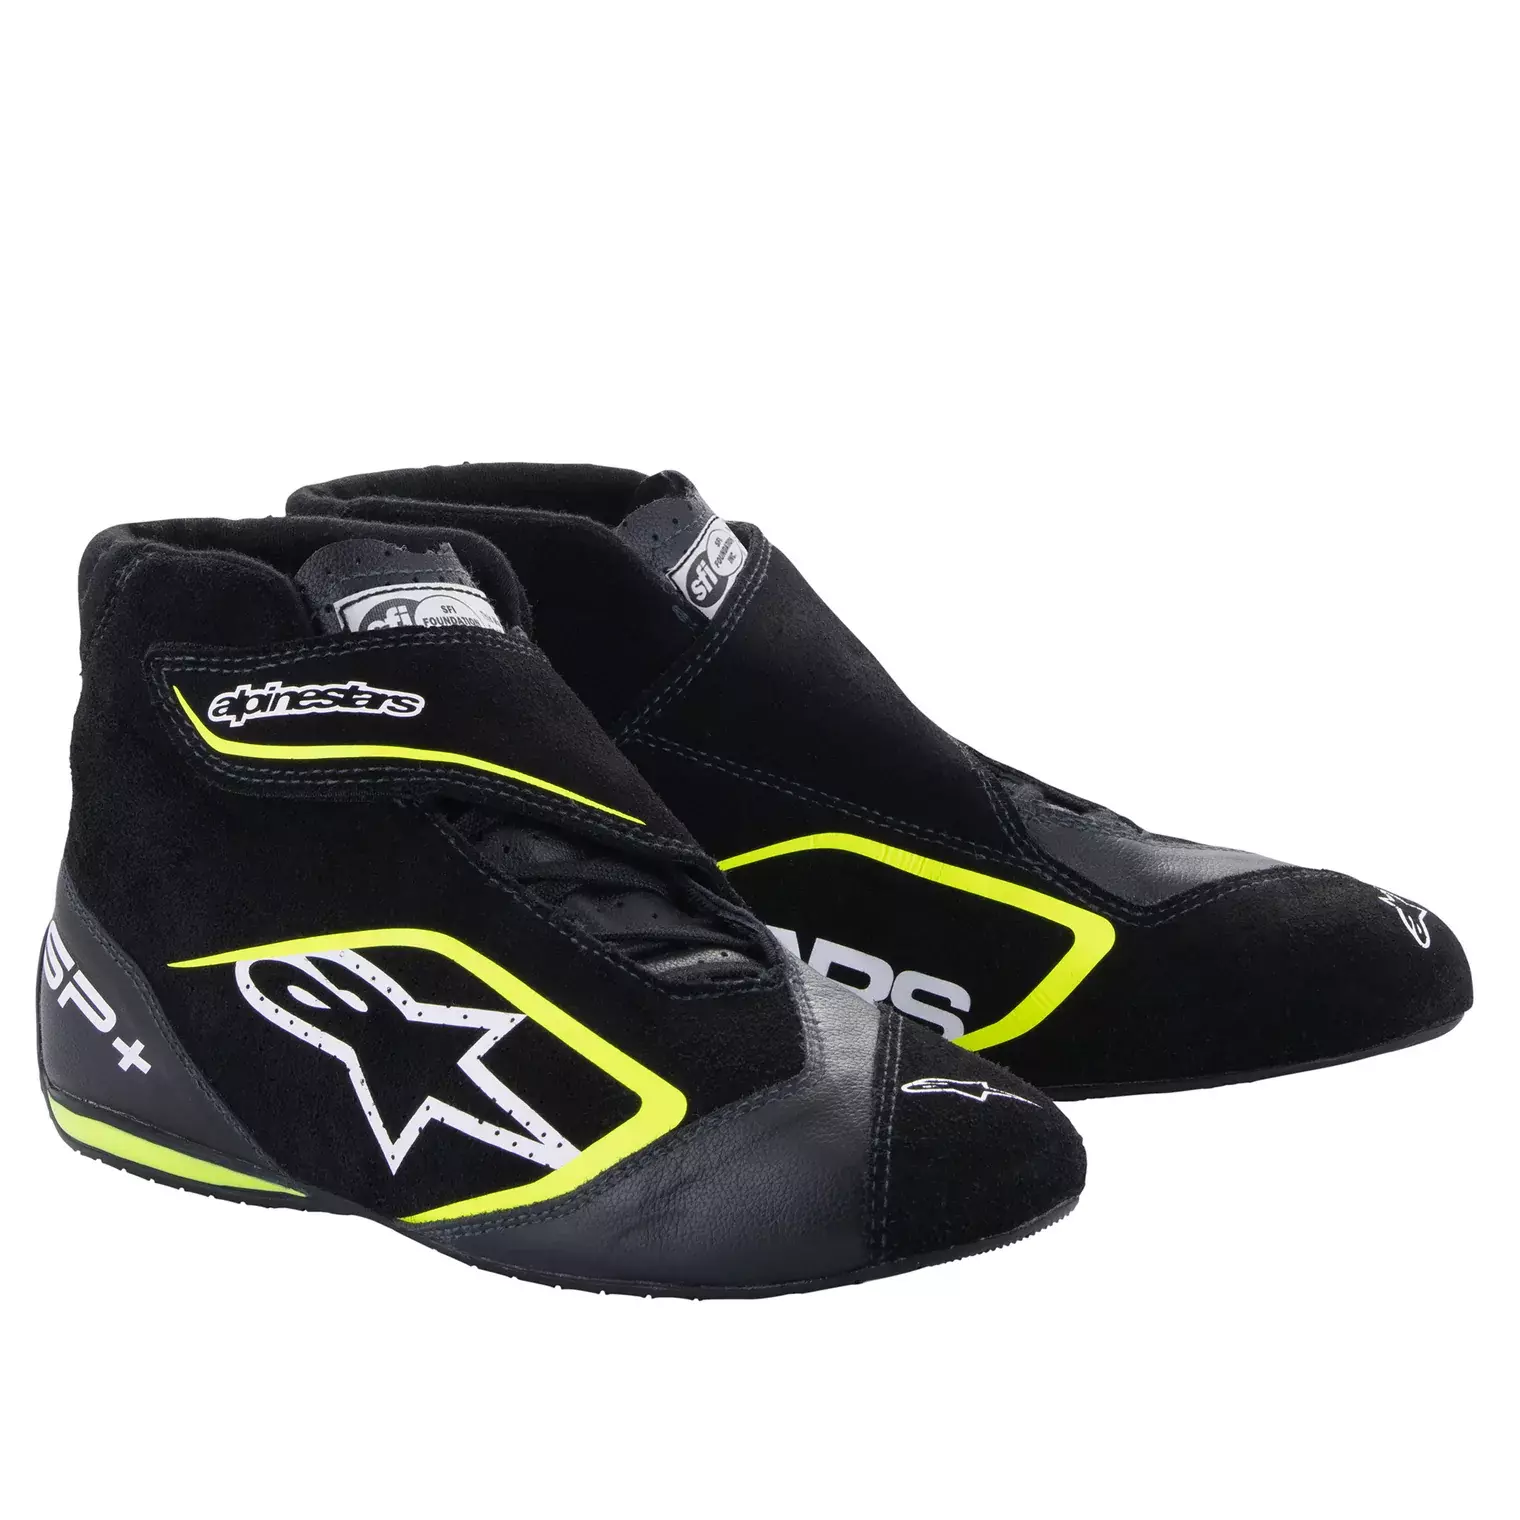 Alpinestars 2710823-155-9.5 Driving Shoe, SP+, Mid-Top, SFI 3.3, FIA Approved, Suede Outer, Nomex Inner, Black / Fluorescent Yellow, Size 9.5, Pair